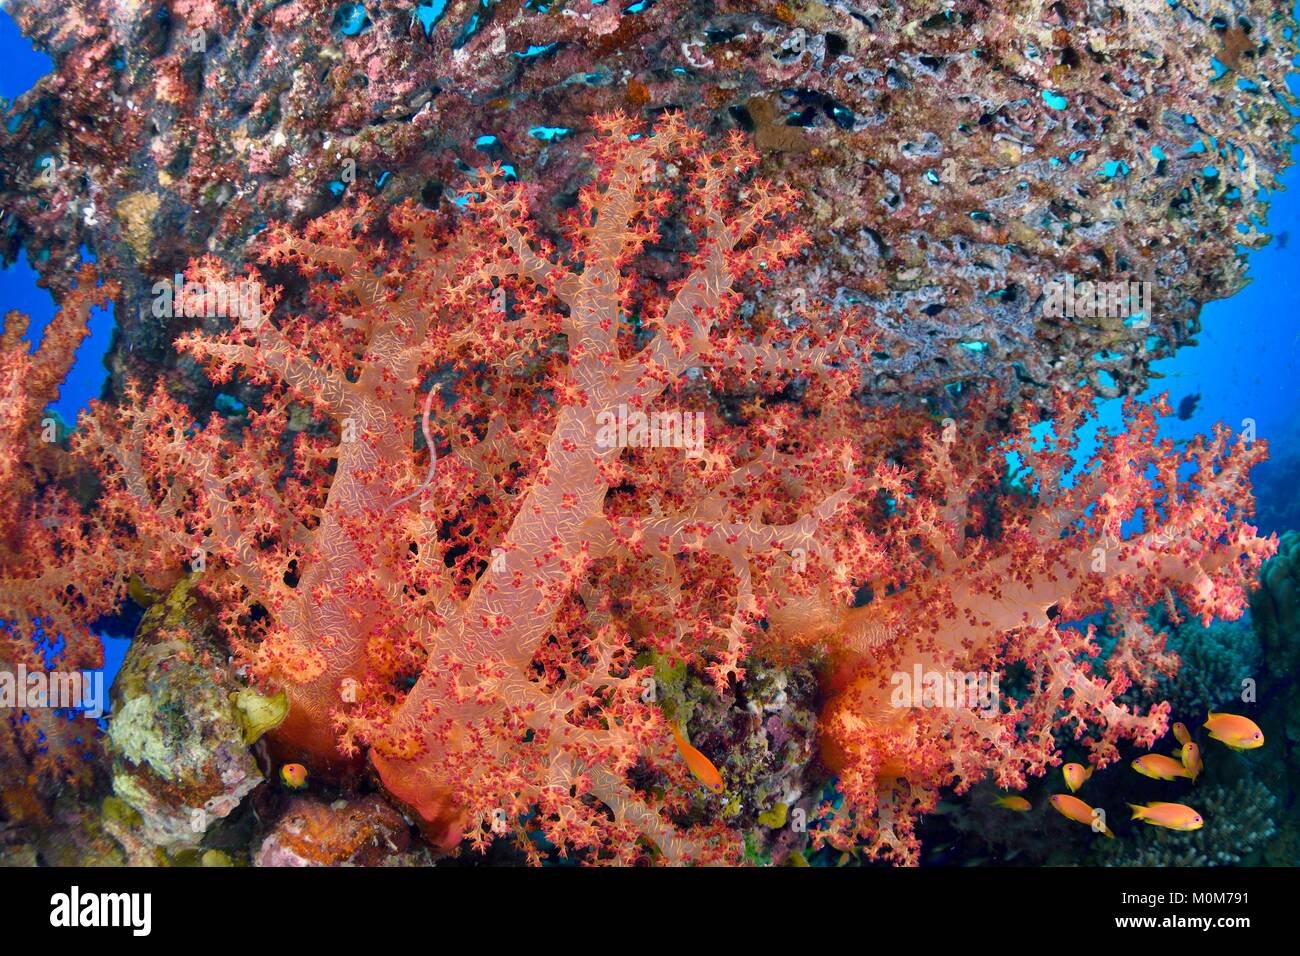 Egypt,Red Sea,red alcyonarians (Dendronephthya sp.) and Acropra sp. corals Stock Photo